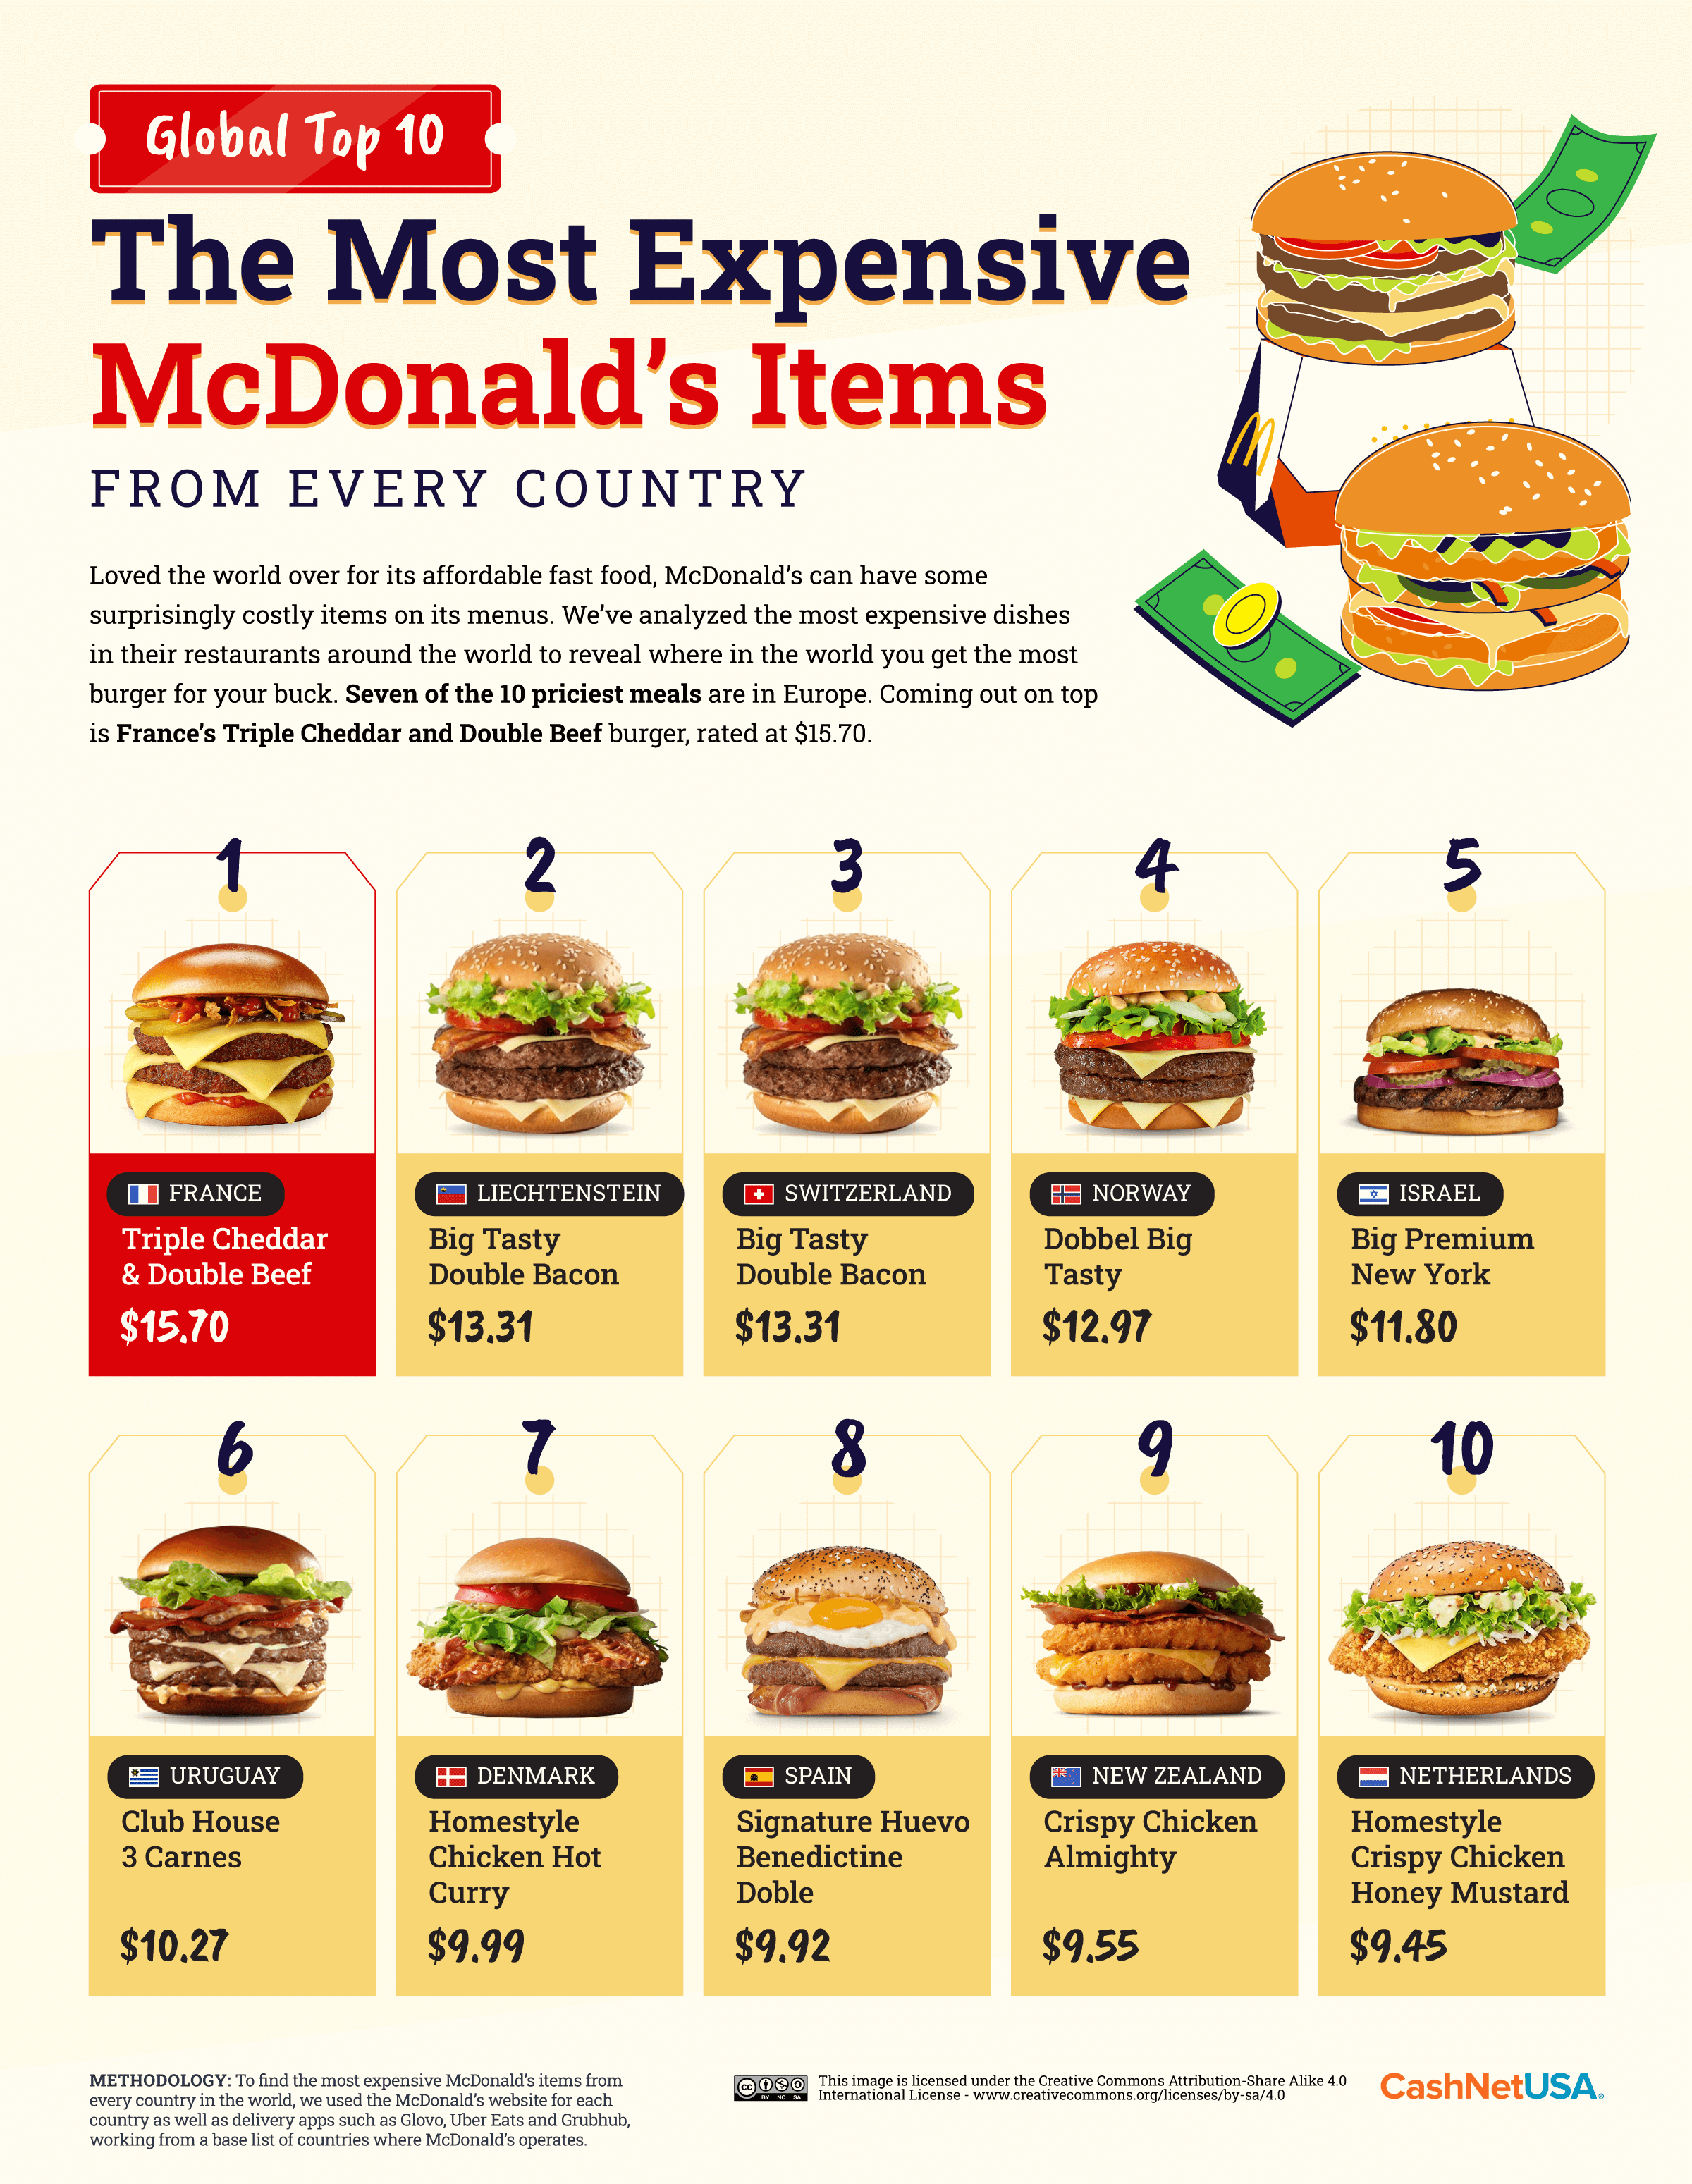 Global Top 10 Most Expensive McDonalds Items